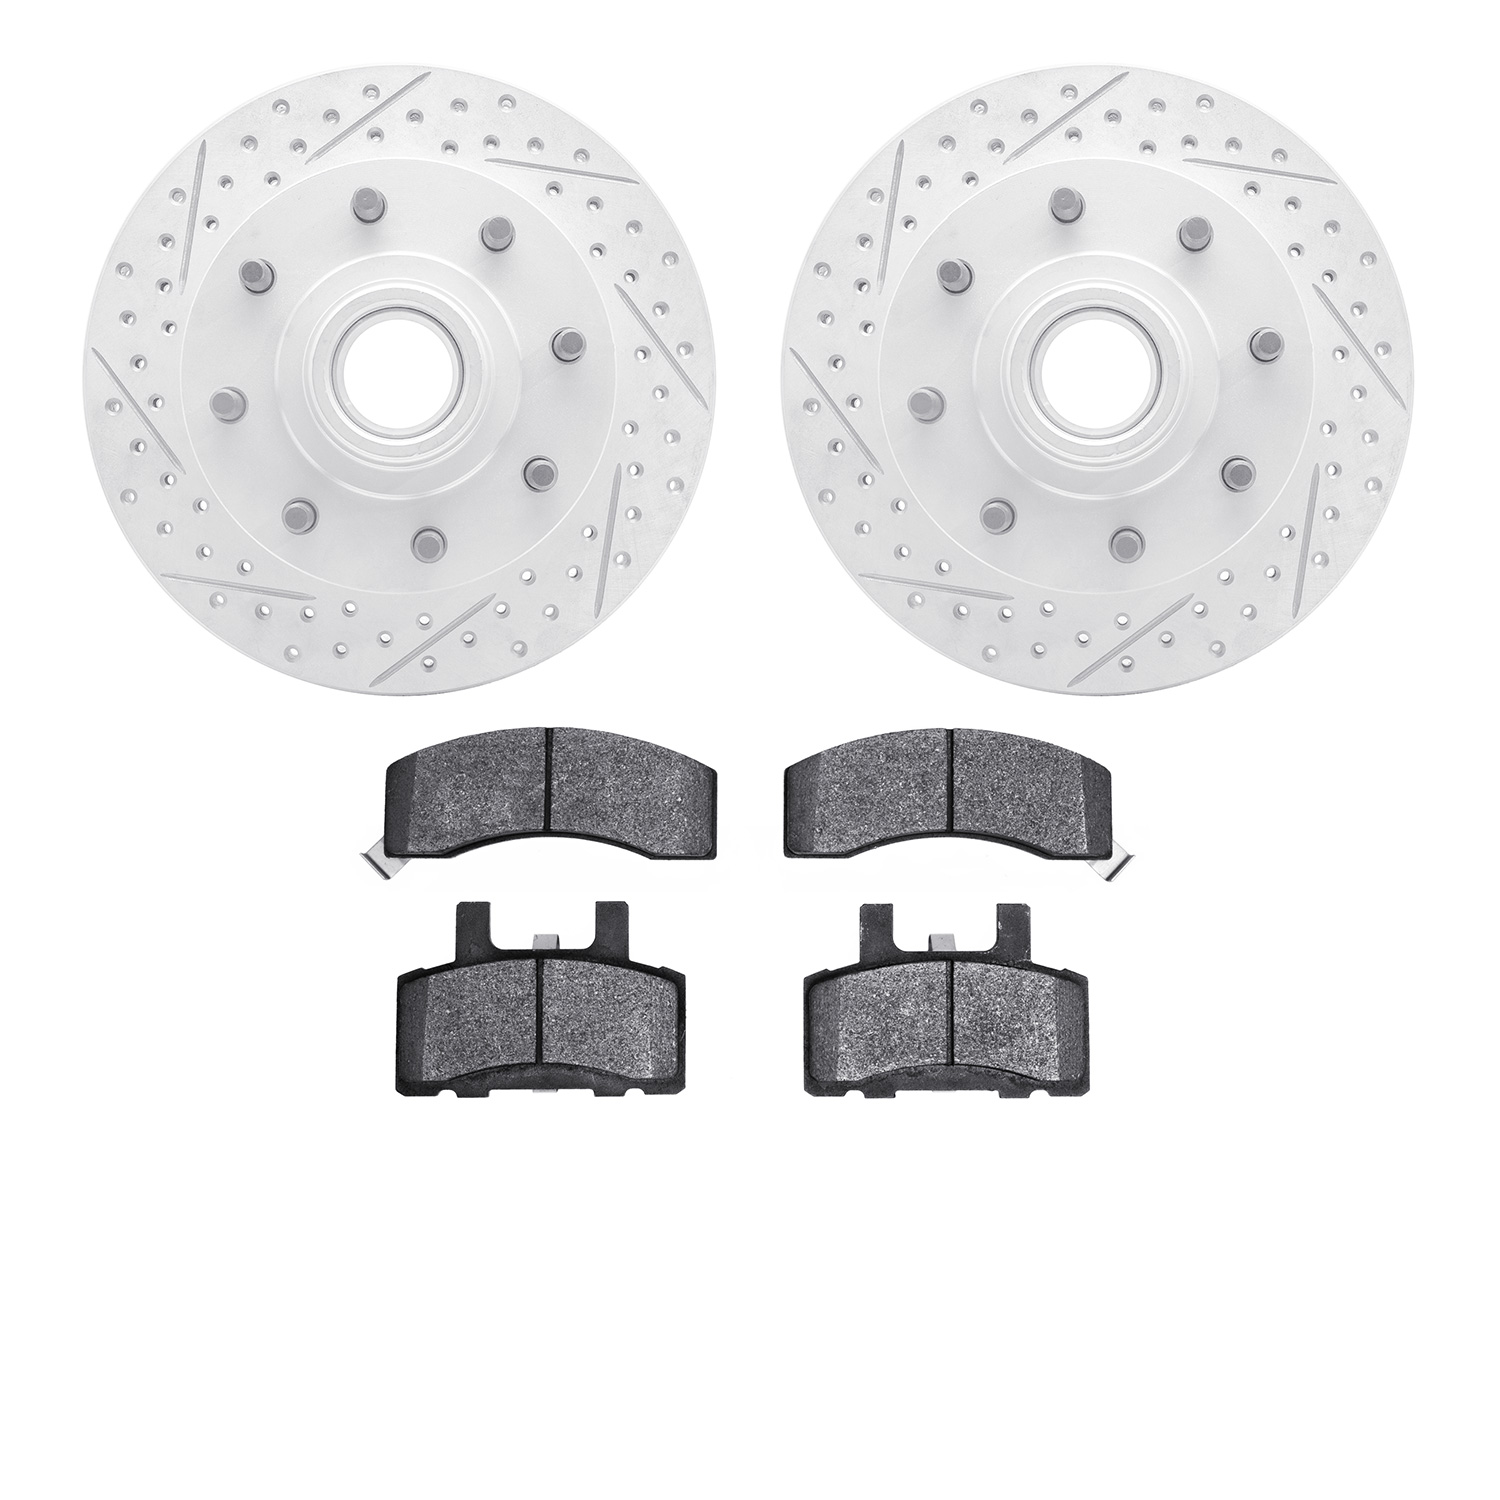 2402-48009 Geoperformance Drilled/Slotted Brake Rotors with Ultimate-Duty Brake Pads Kit, 1992-2002 GM, Position: Front